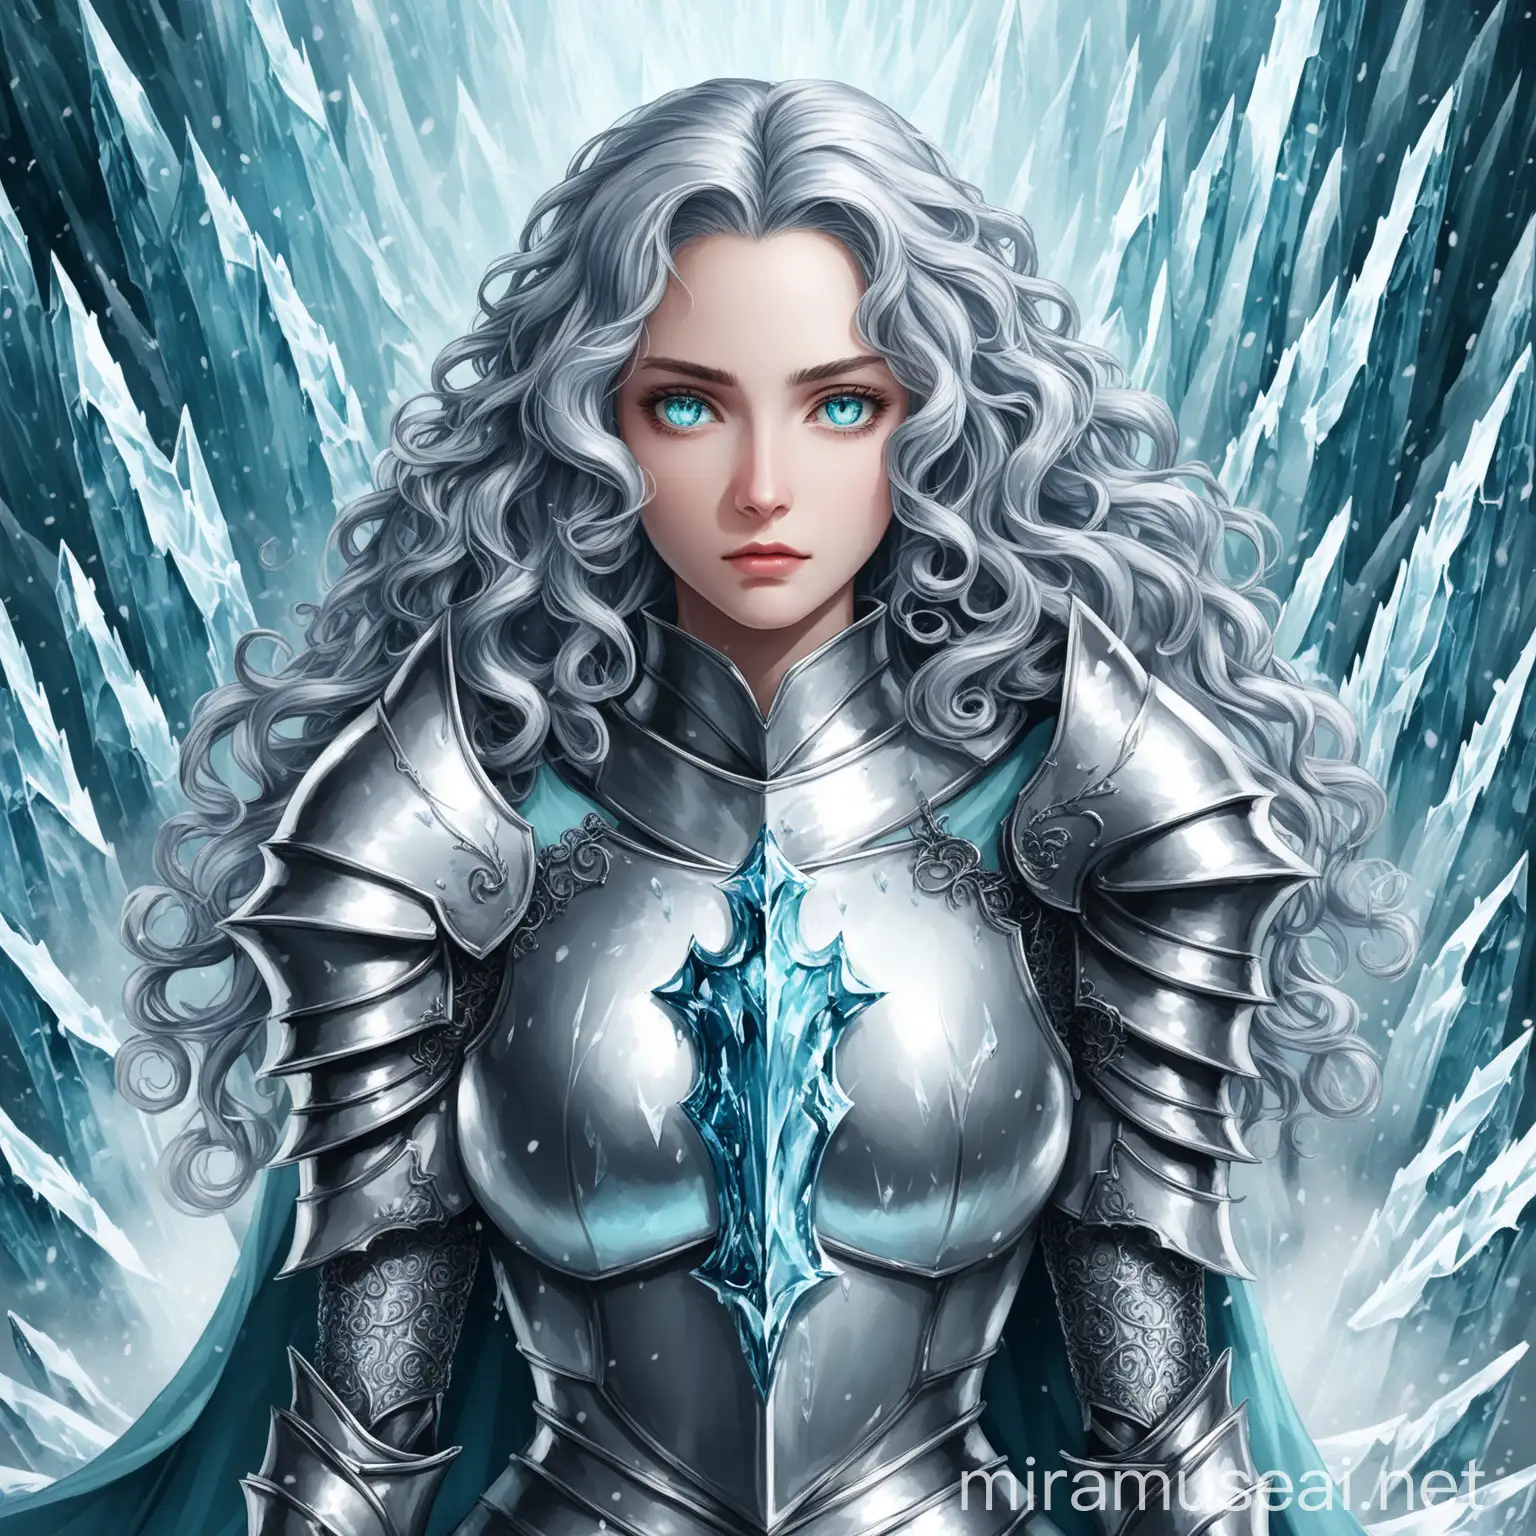 Curly Silver hair, shoulder-length hair, icy aqua eye, ice cold background, knight woman, powerful being